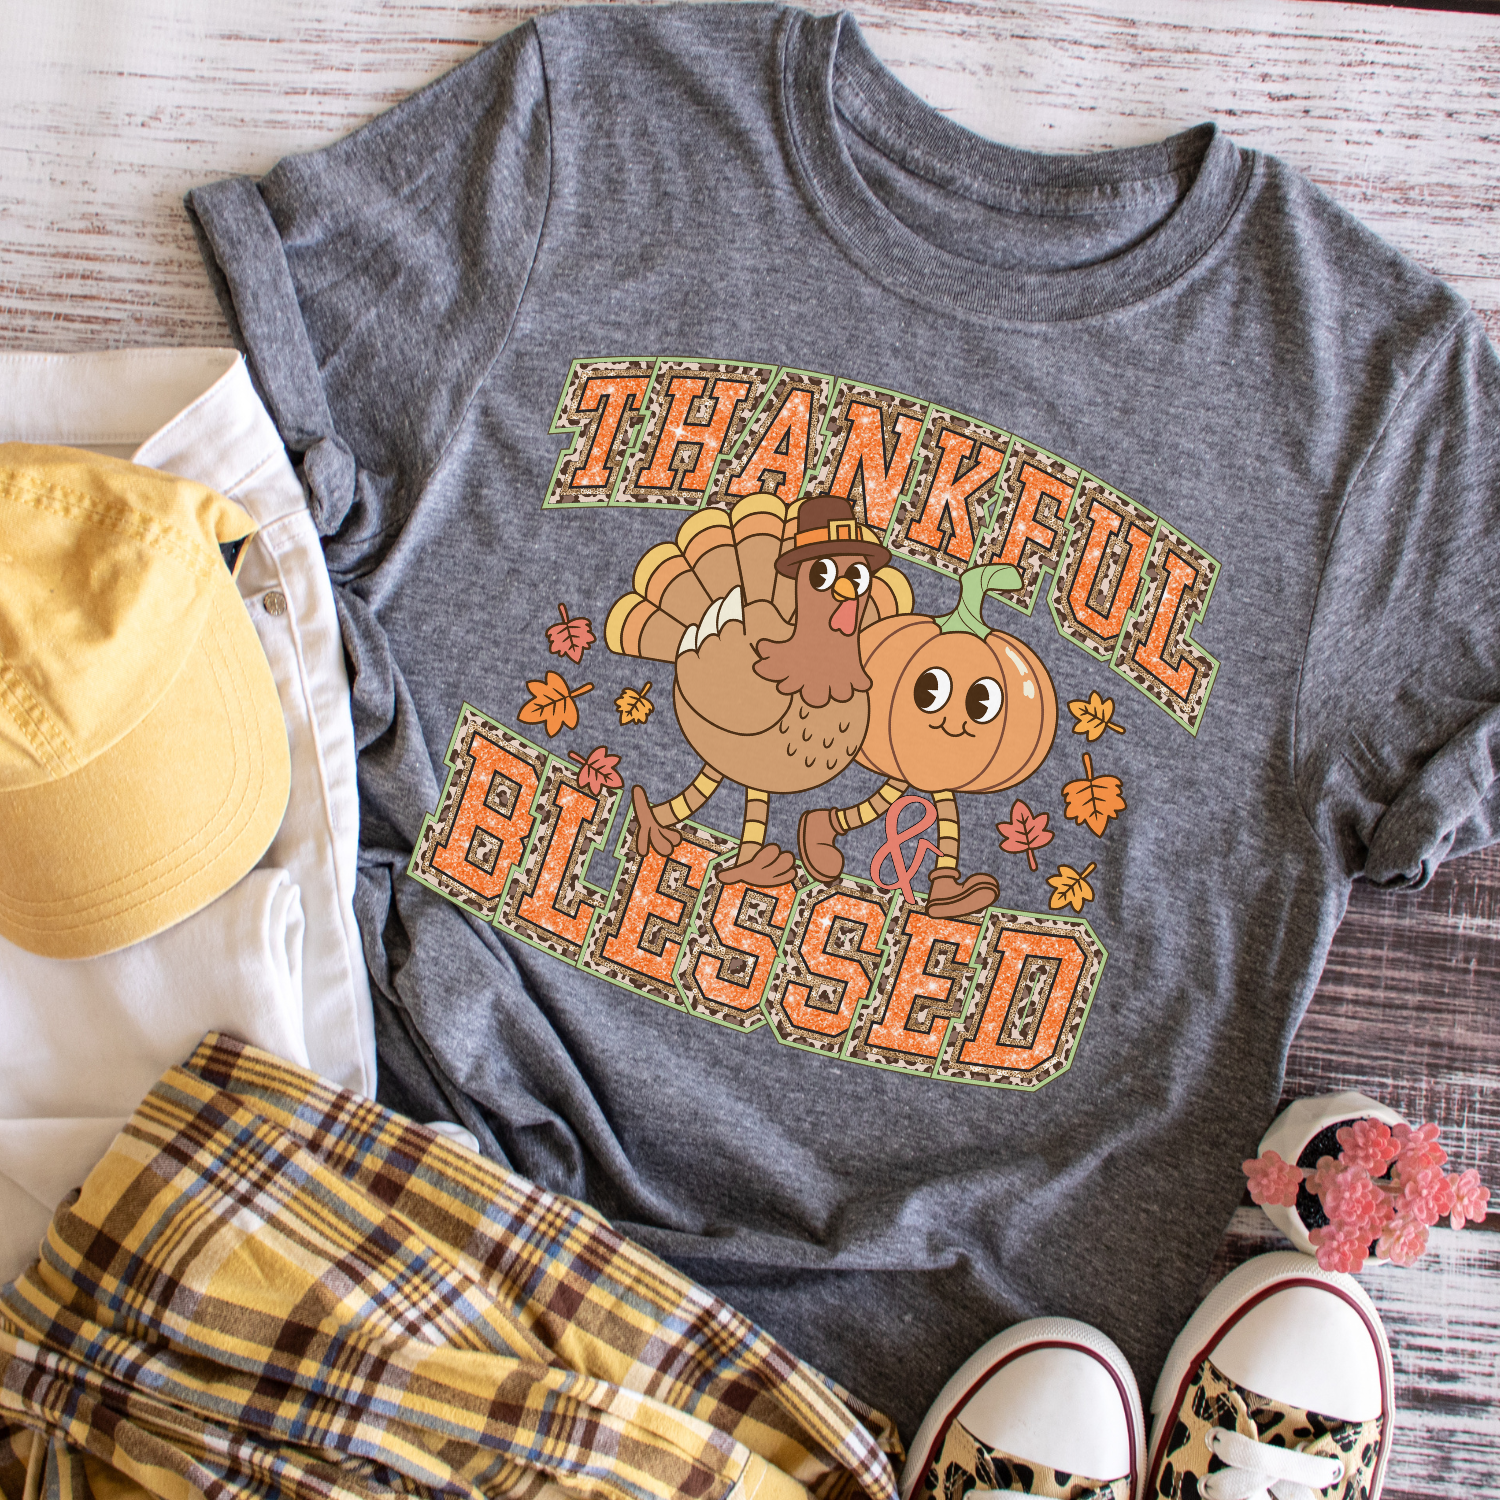 Thankful & Blessed Shirt